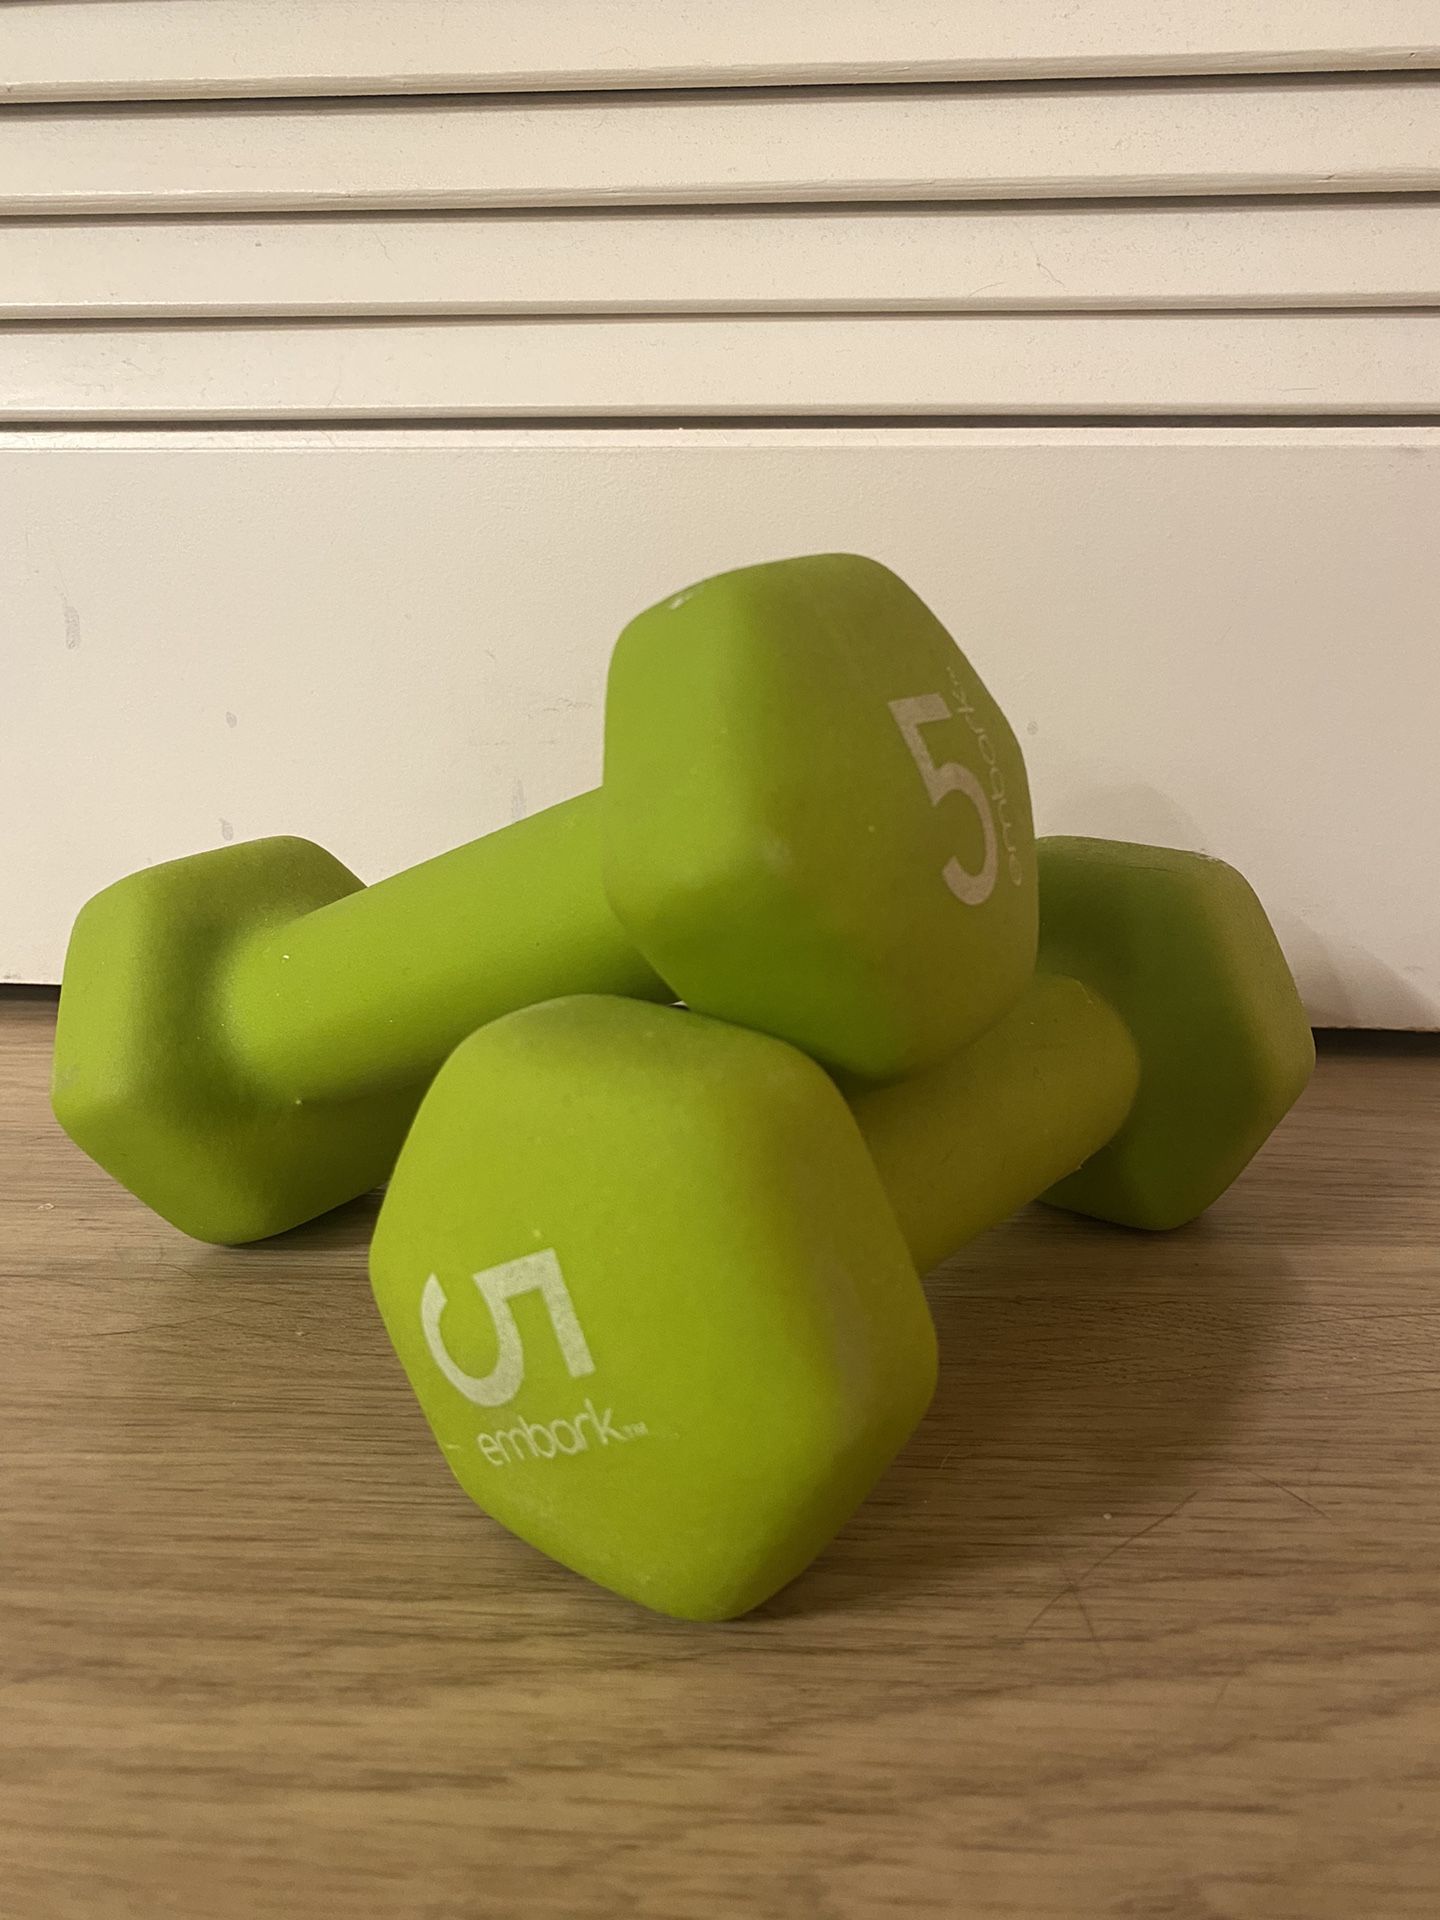 Pair of 5 Lb Dumbbells Hand Weights